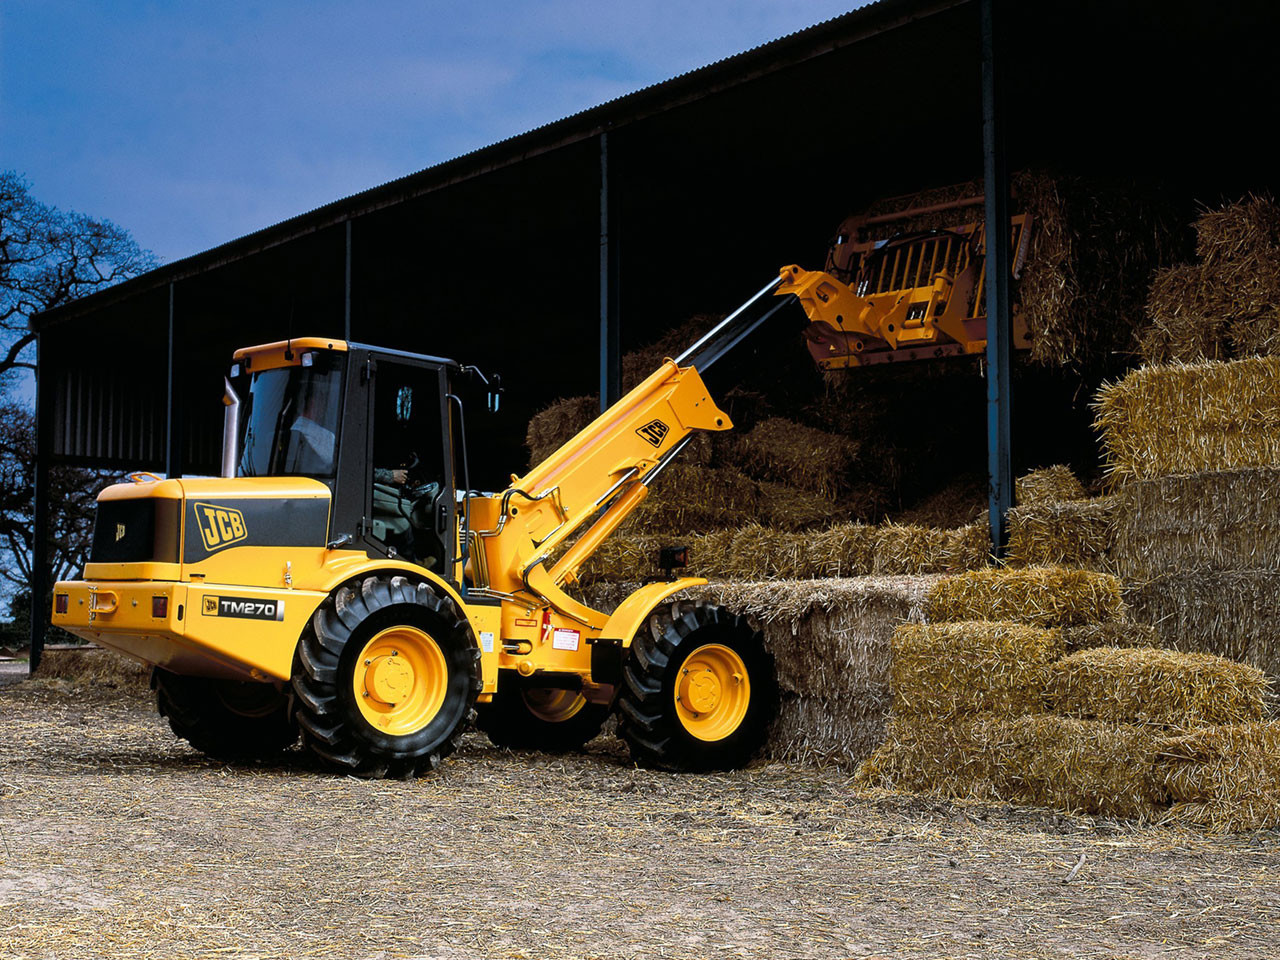 La pala gommata Jcb compie 50 anni 1680x1260_1558611418_1997---the-new-tm270-telemaster-joined-the-line-up